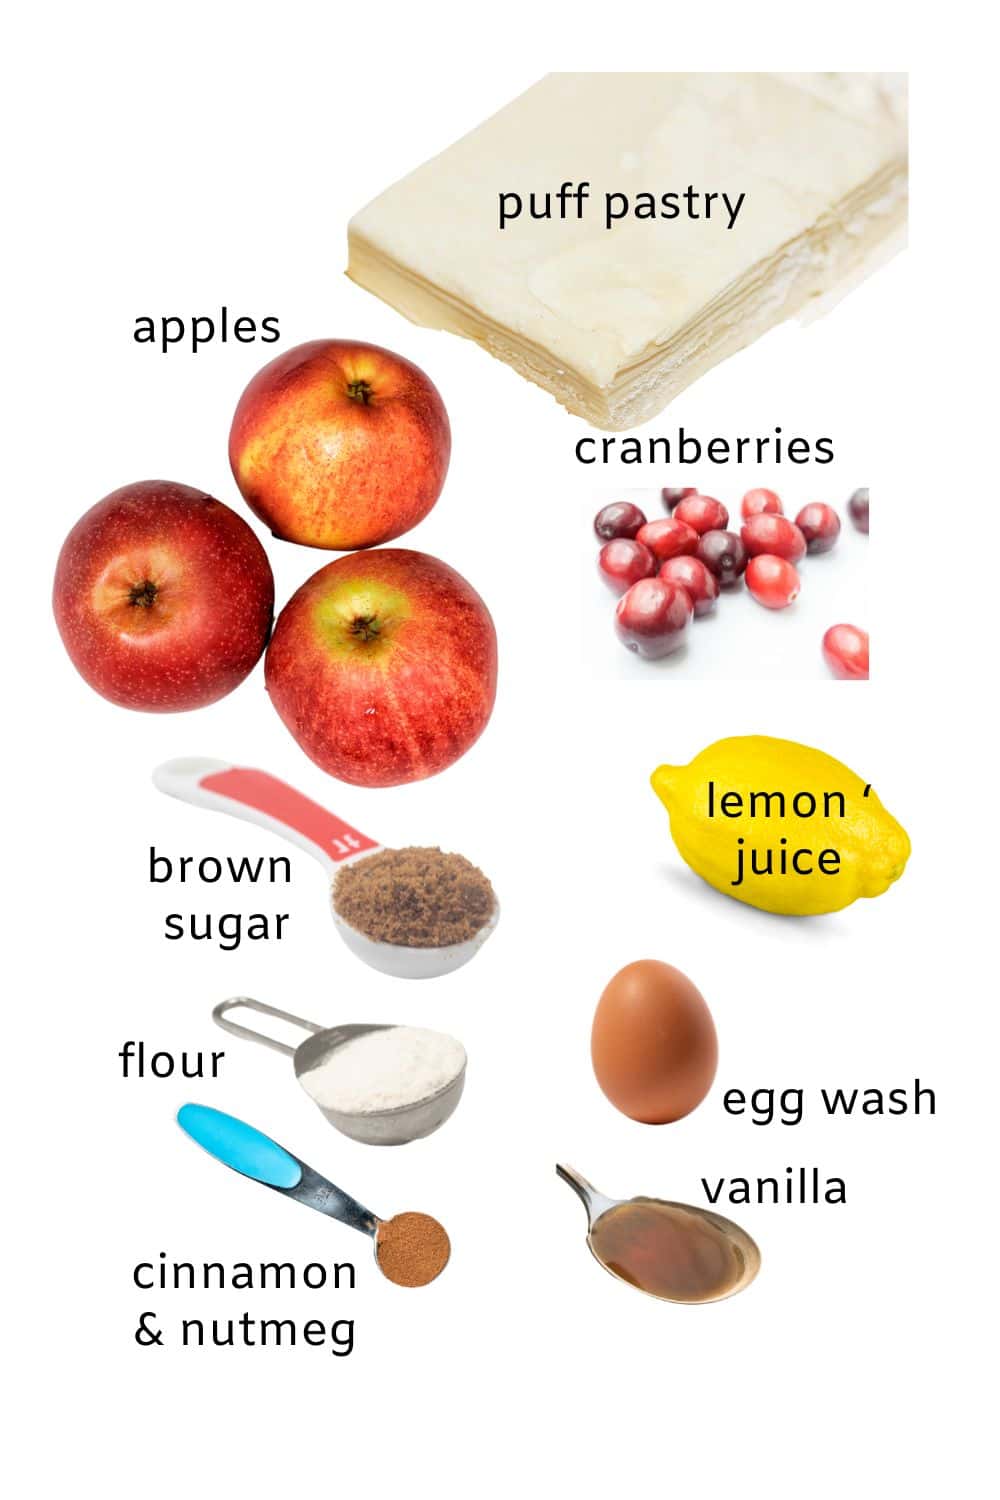 Ingredients for apple cranberry galette with gluten-free puff pastry" apples, cranberries, lemon juice, cinnamon, sugar, nutmeg, egg wash and vanilla extract.